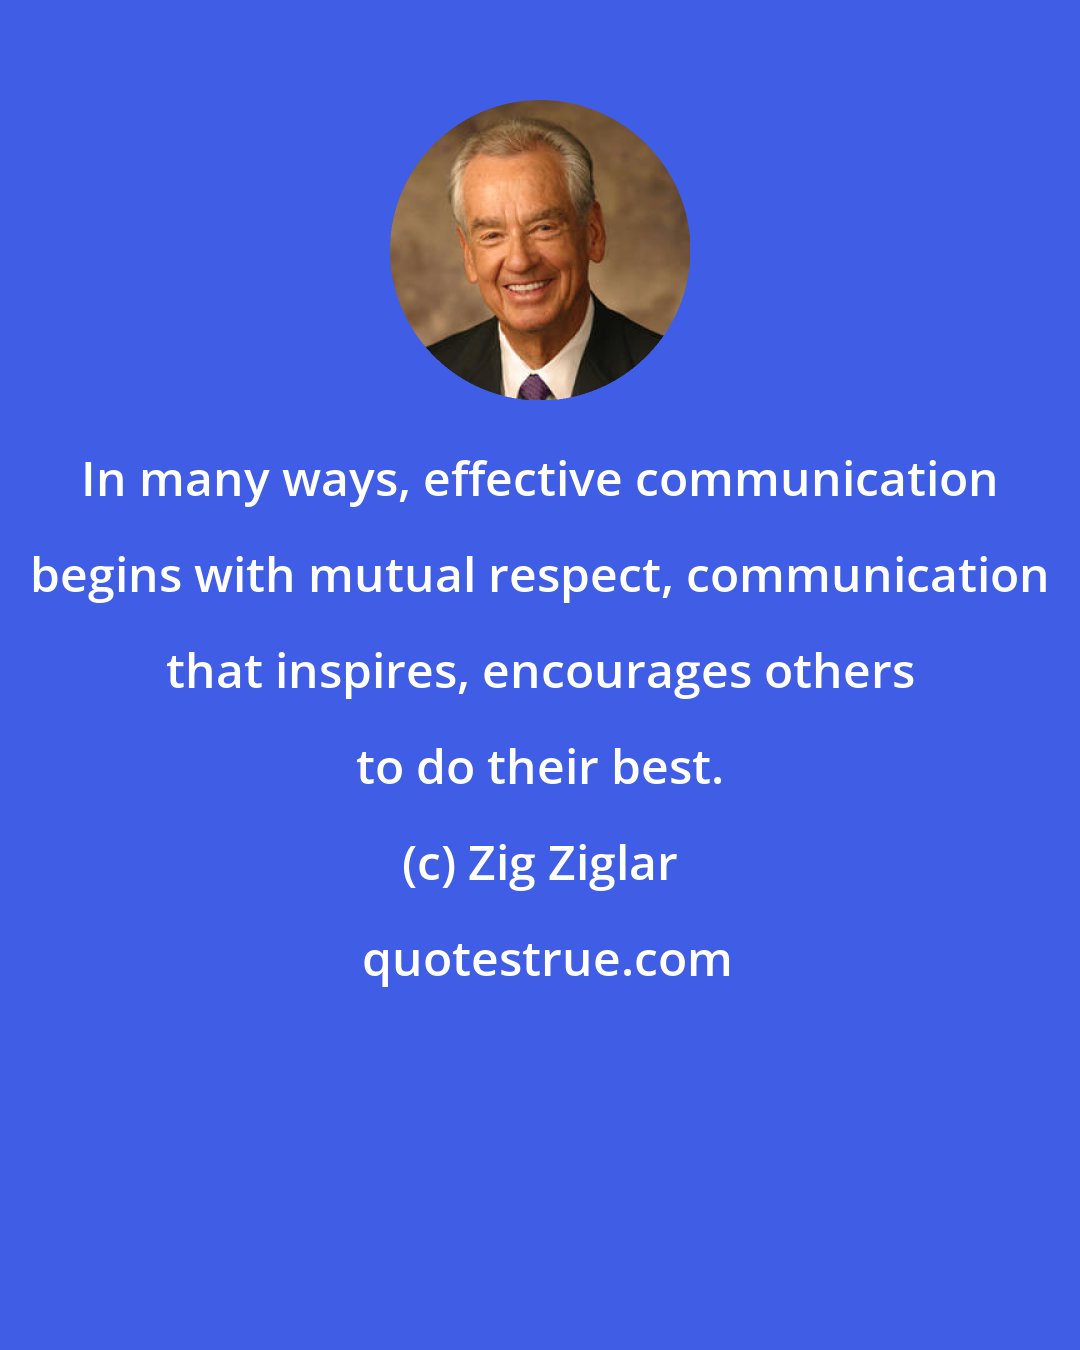 Zig Ziglar: In many ways, effective communication begins with mutual respect, communication that inspires, encourages others to do their best.